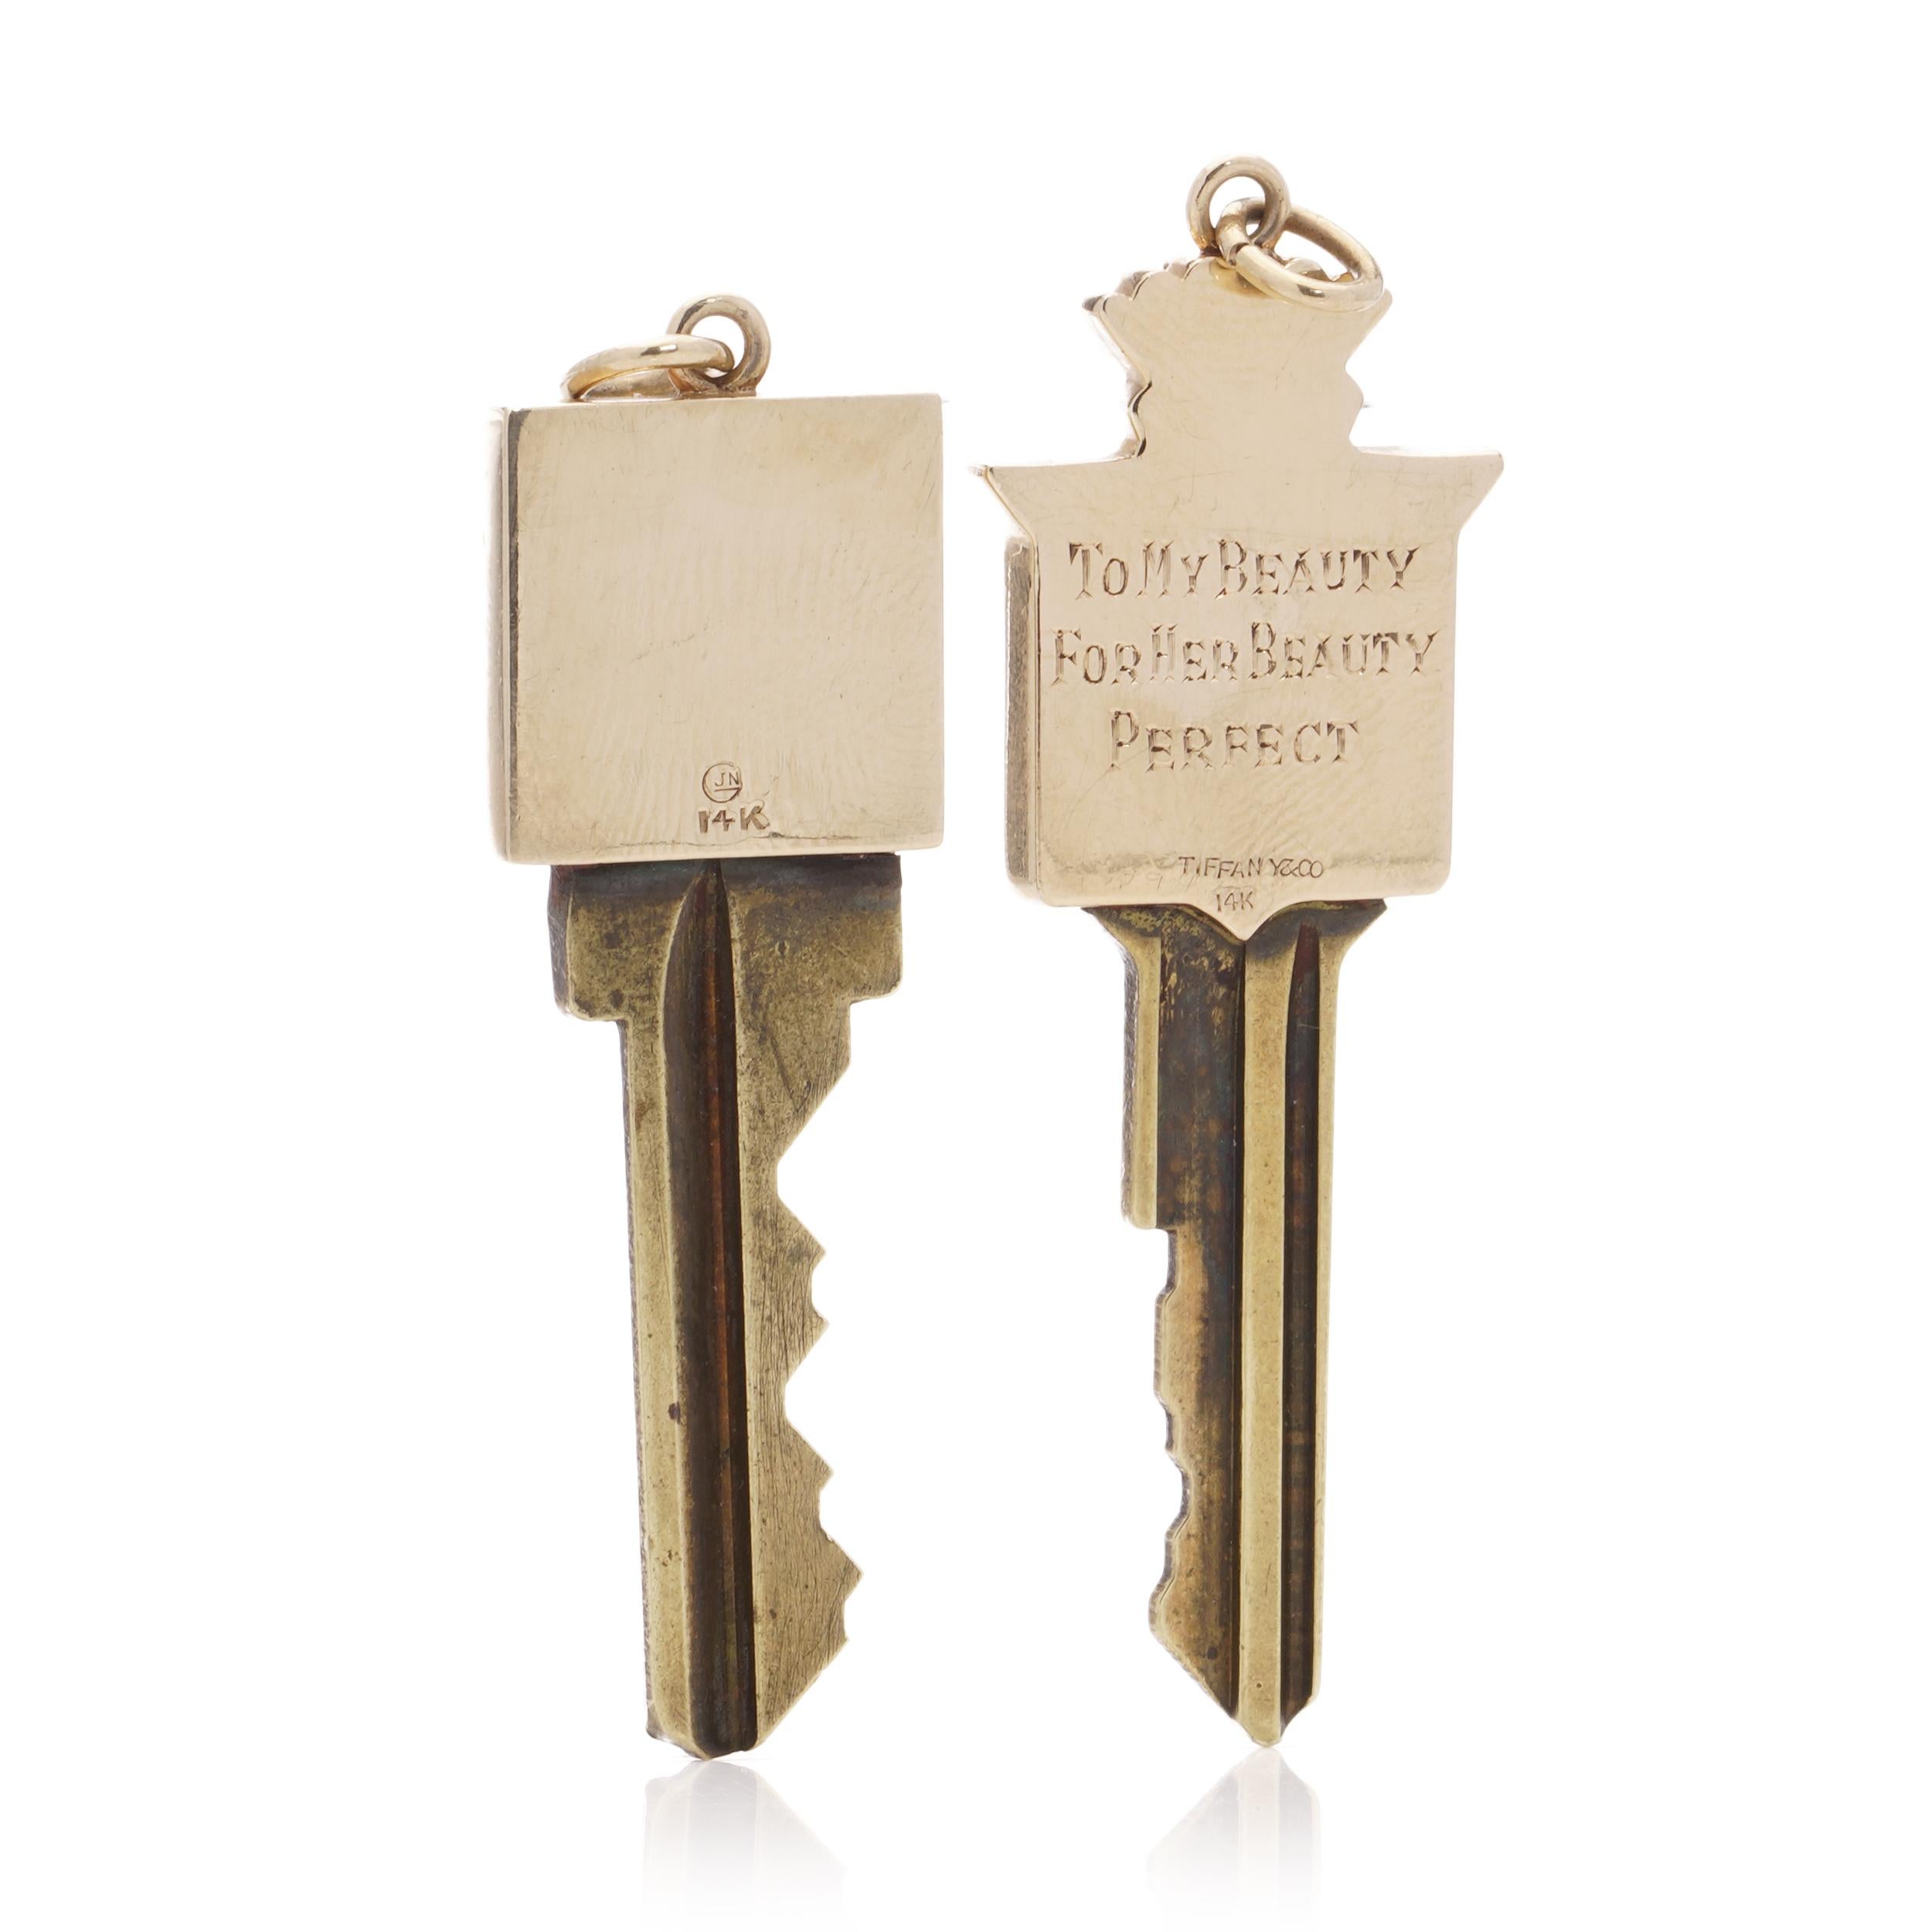 Two gold mounted keys, one with Cadillac logo design finial, engraved verso 'to my beauty, for her beauty, perfect', stamped Tiffany & Co 14k; the other of plain form, stamped GJN 14k, both with metal blades (2)

Property from the estate of the late